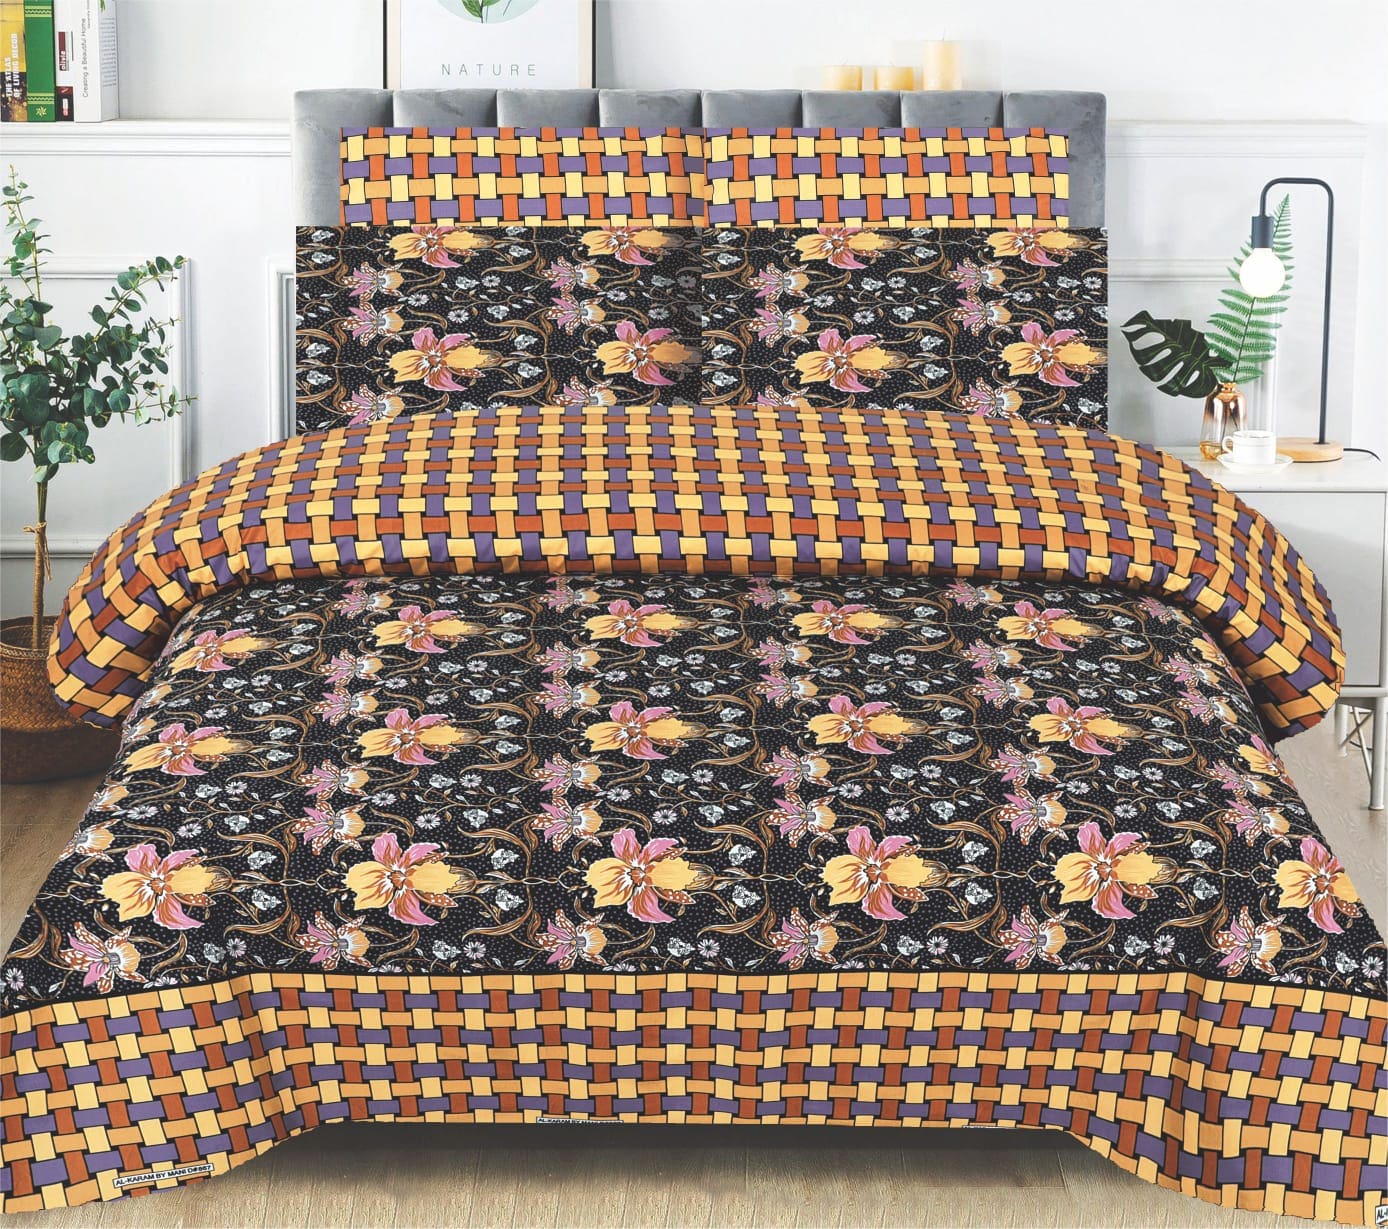 Grace D938- 6 pc summer Comforter Set with 4 pillow covers